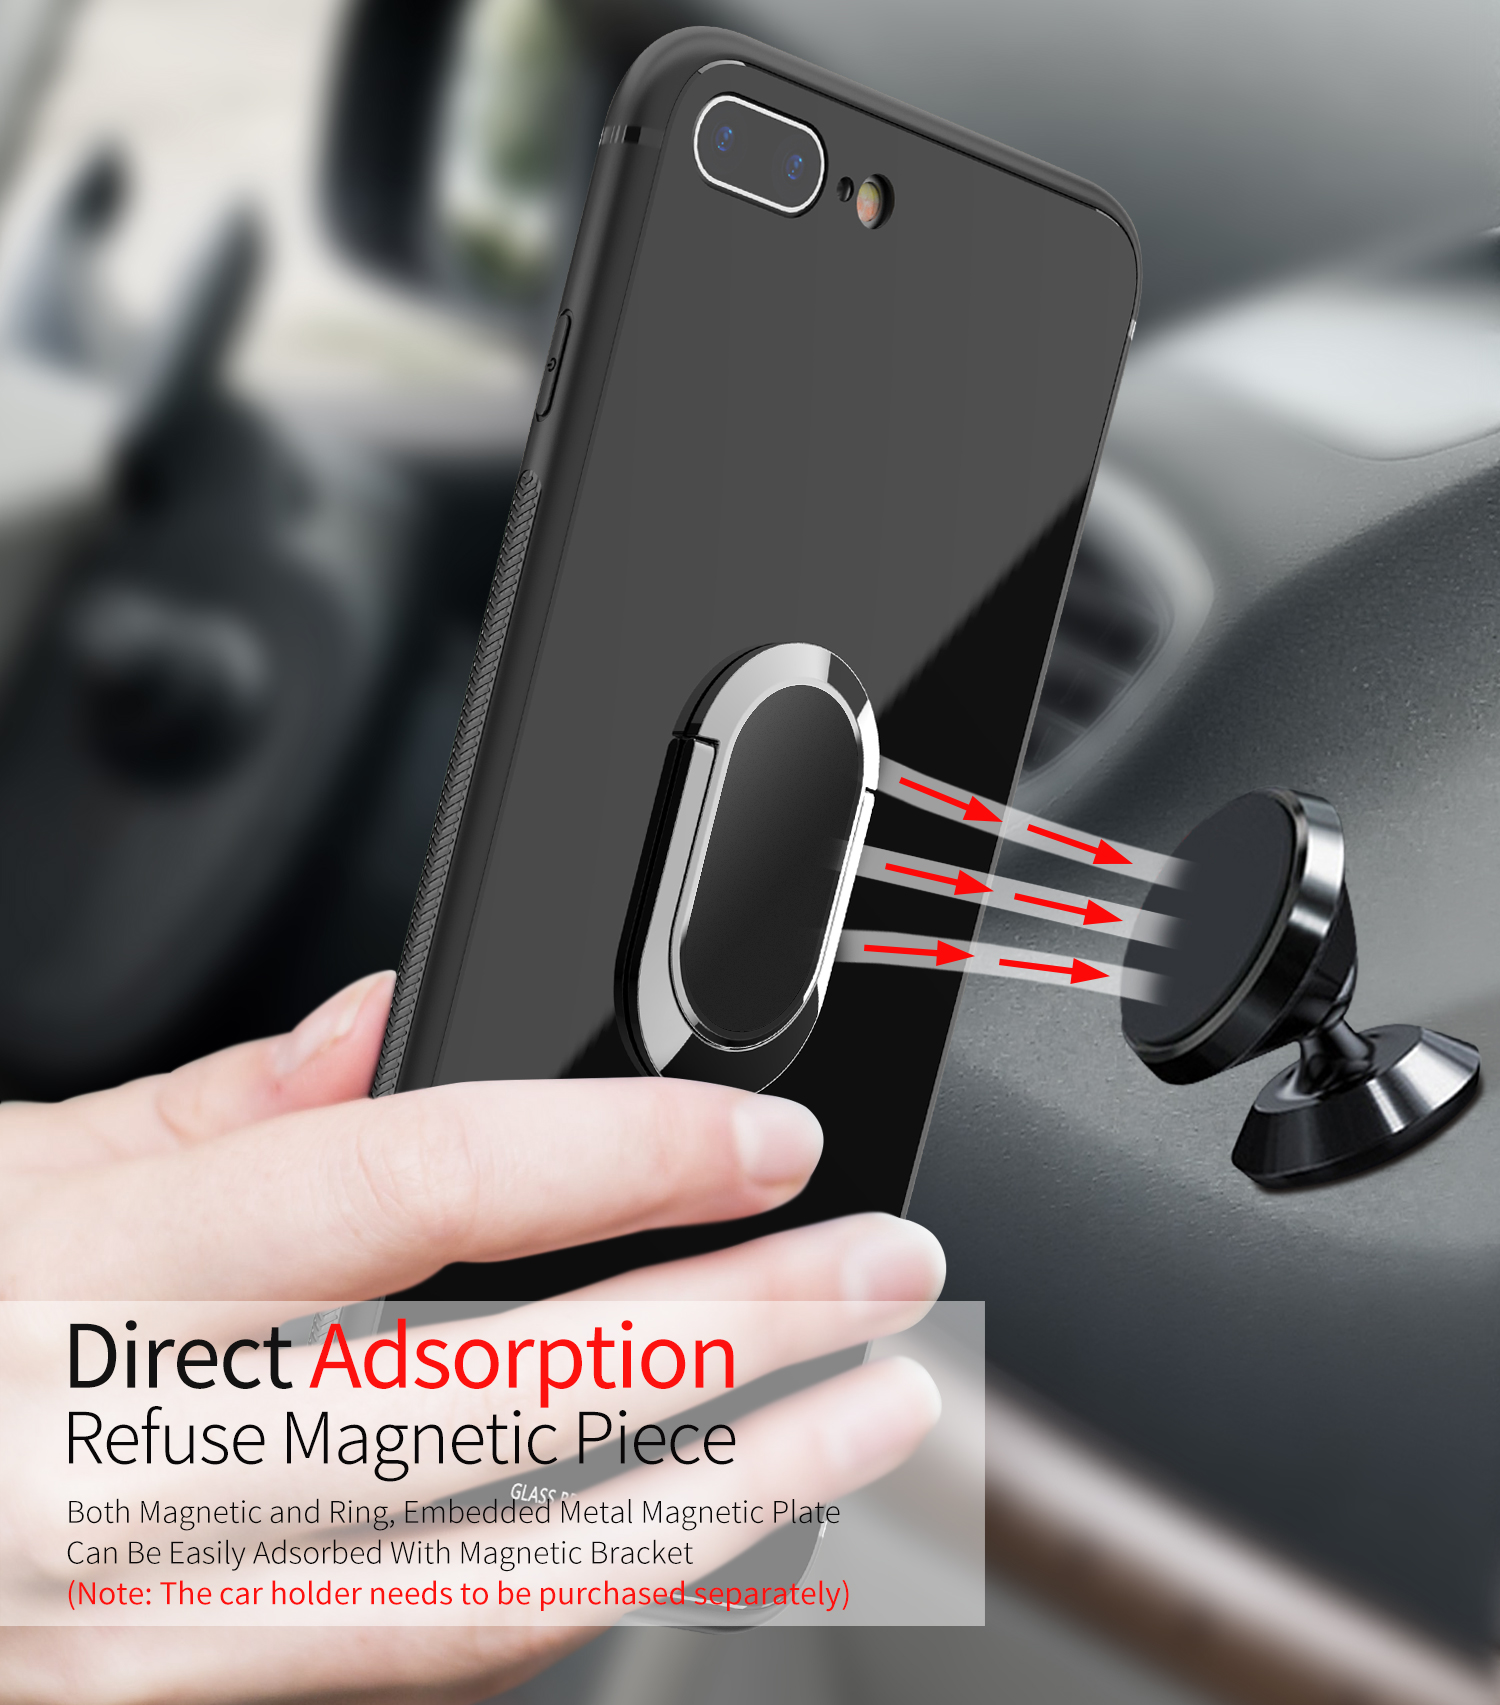 Bakeey-360deg-Rotation-Ring-Kickstand-Magnetic-Glass-Protective-Case-for-iPhone-77-Plus88-Plus-1320629-2